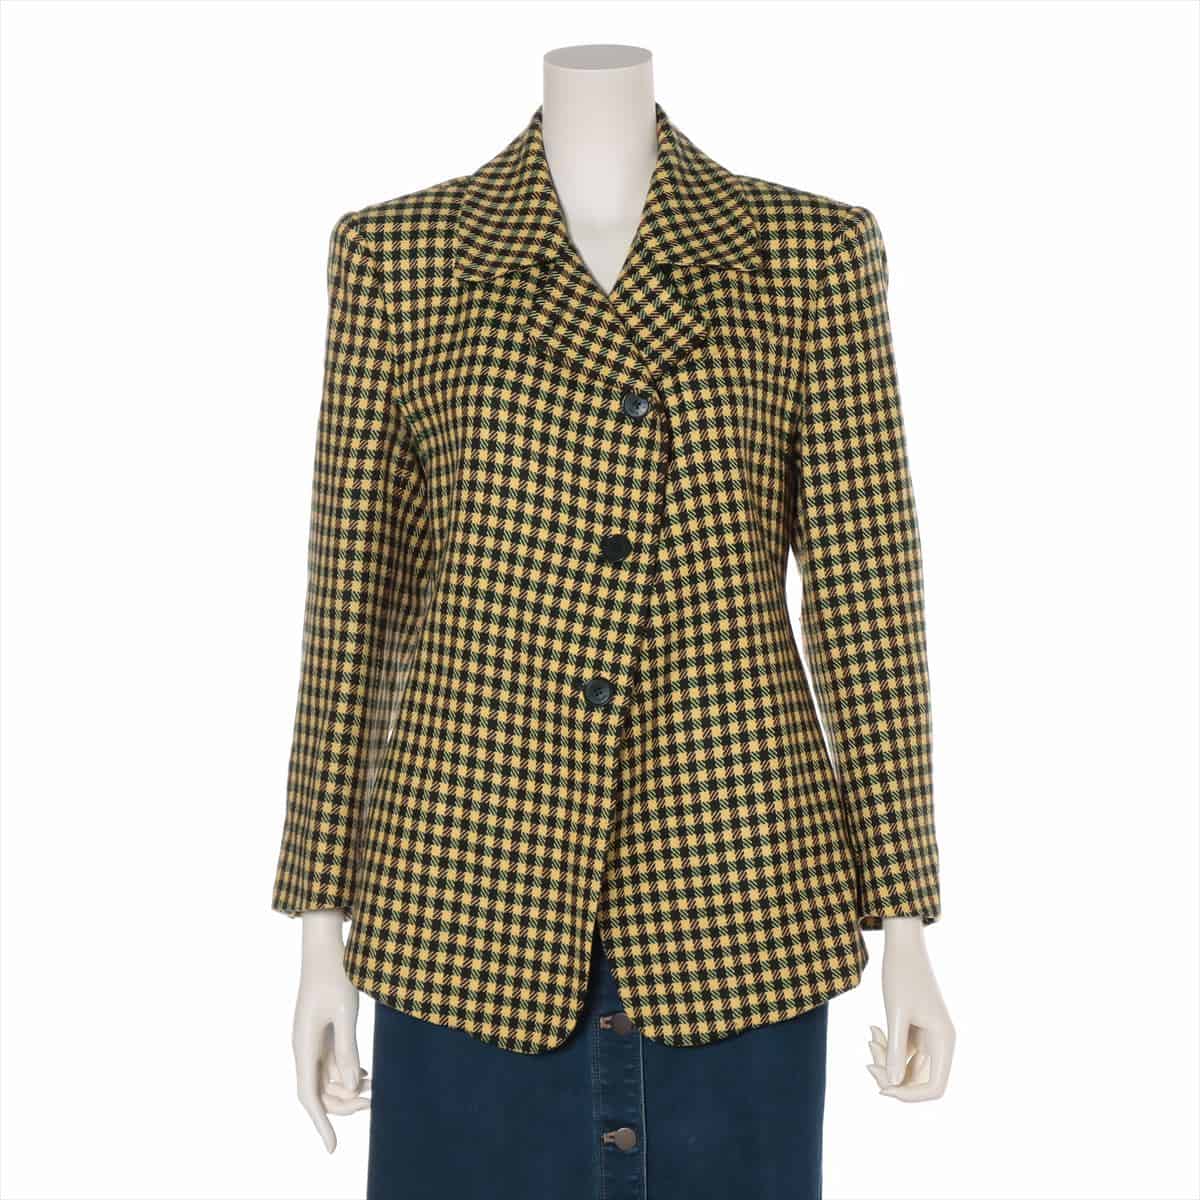 Hermès Wool & Cashmere Tailored jacket 40 Ladies' Yellow  Houndstooth